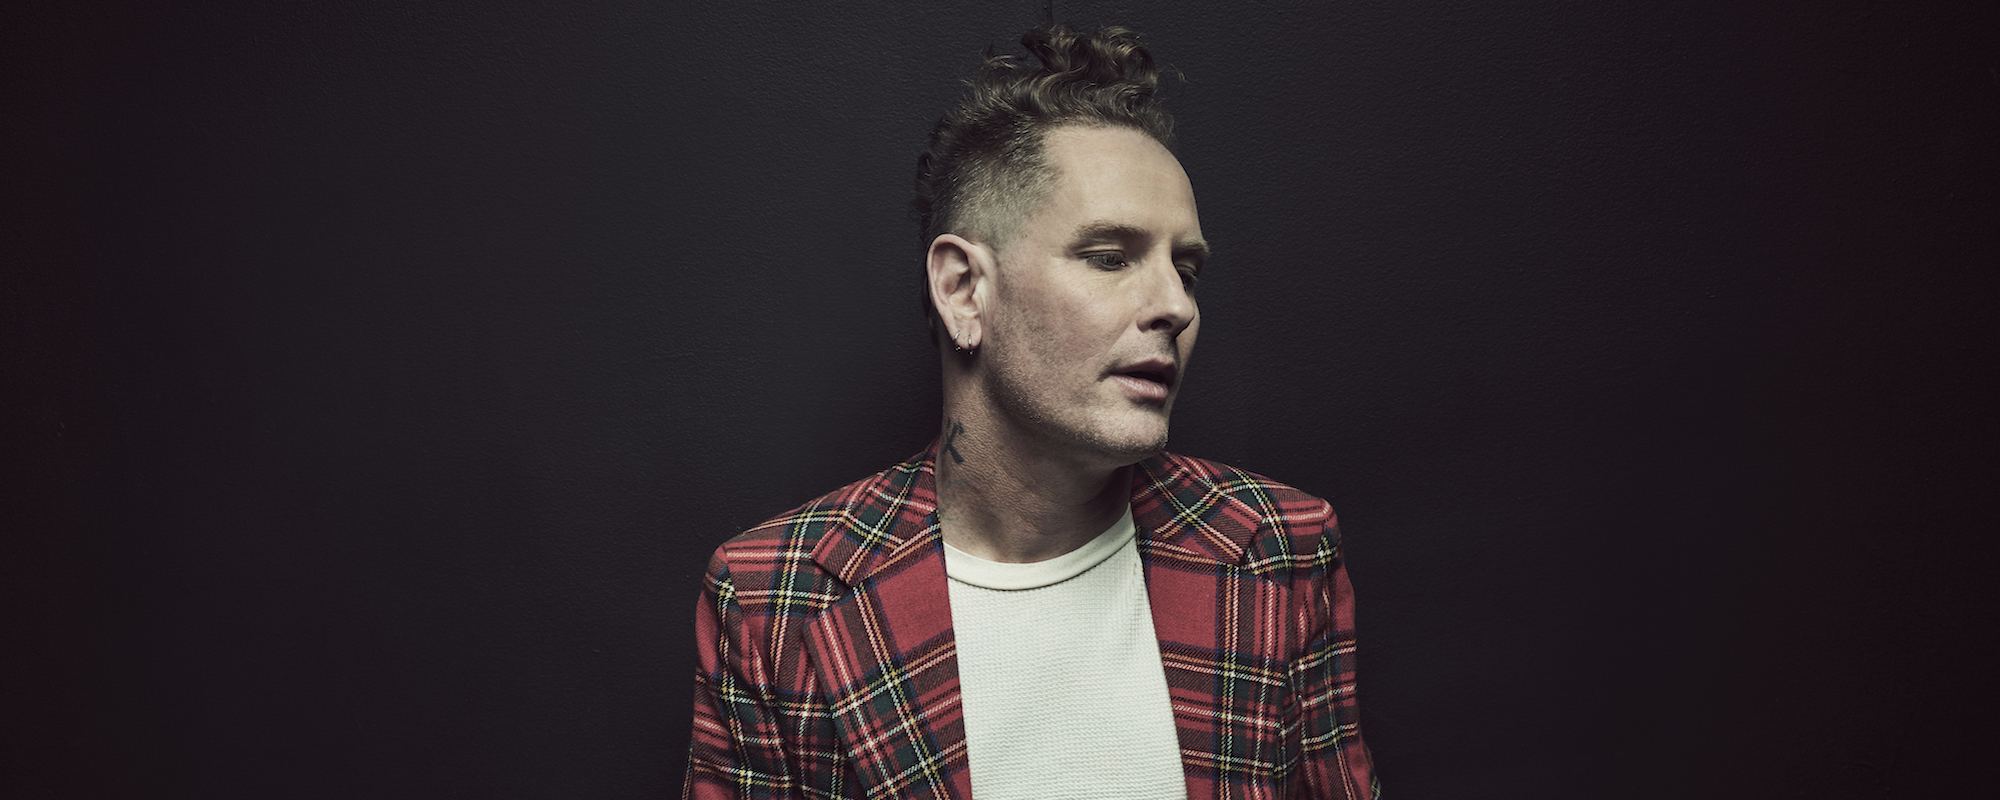 Corey Taylor Stirs Personal Stories, Influences, and Plenty of “Risks” on Second Solo Release ‘CMF2’